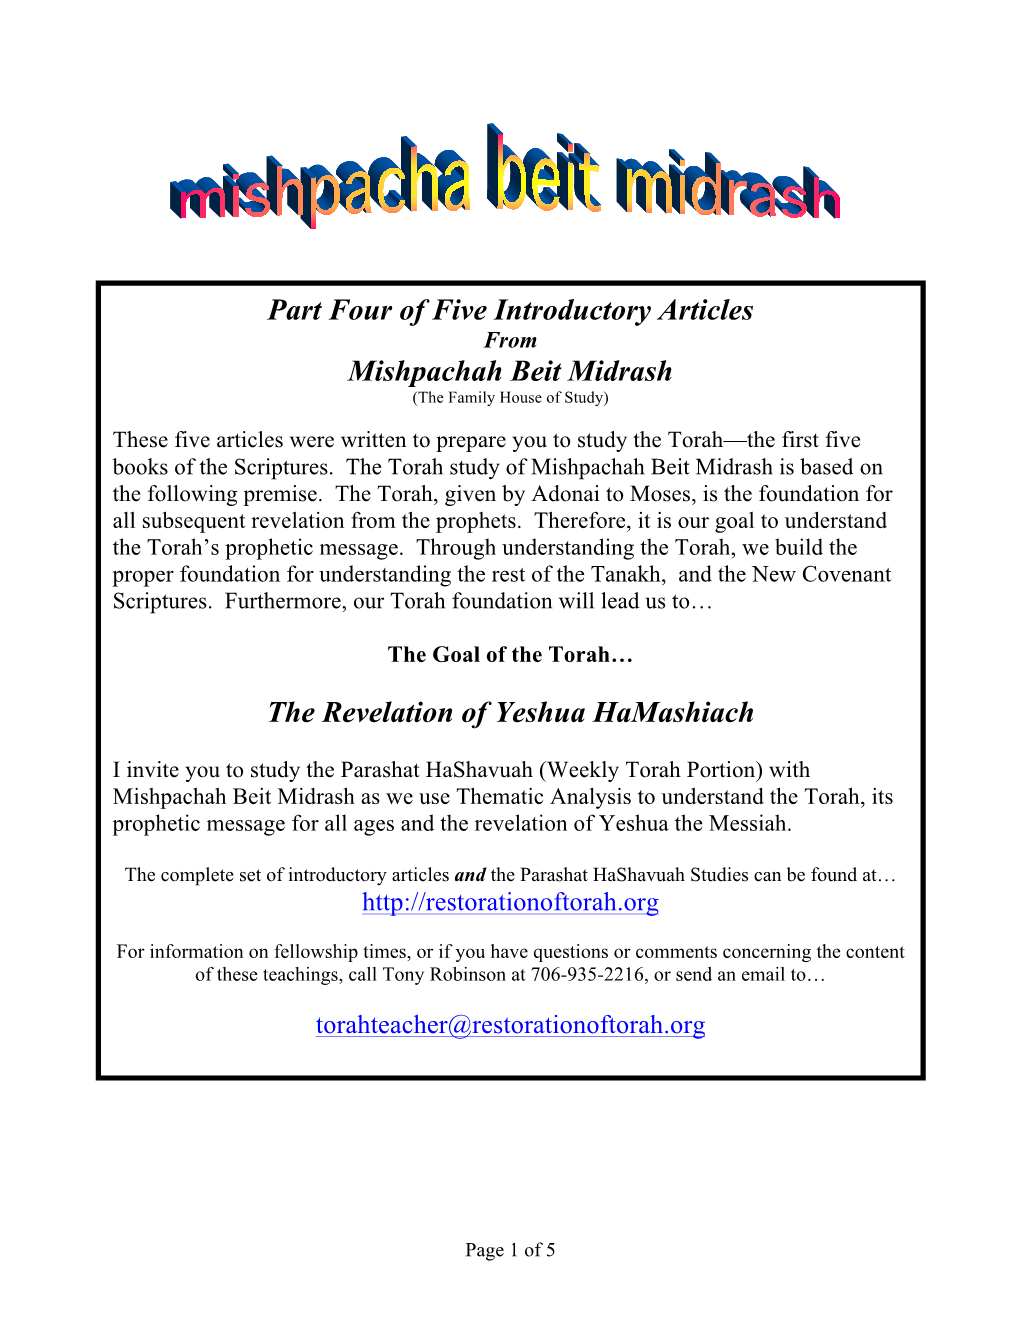 Part Four of Five Introductory Articles Mishpachah Beit Midrash The